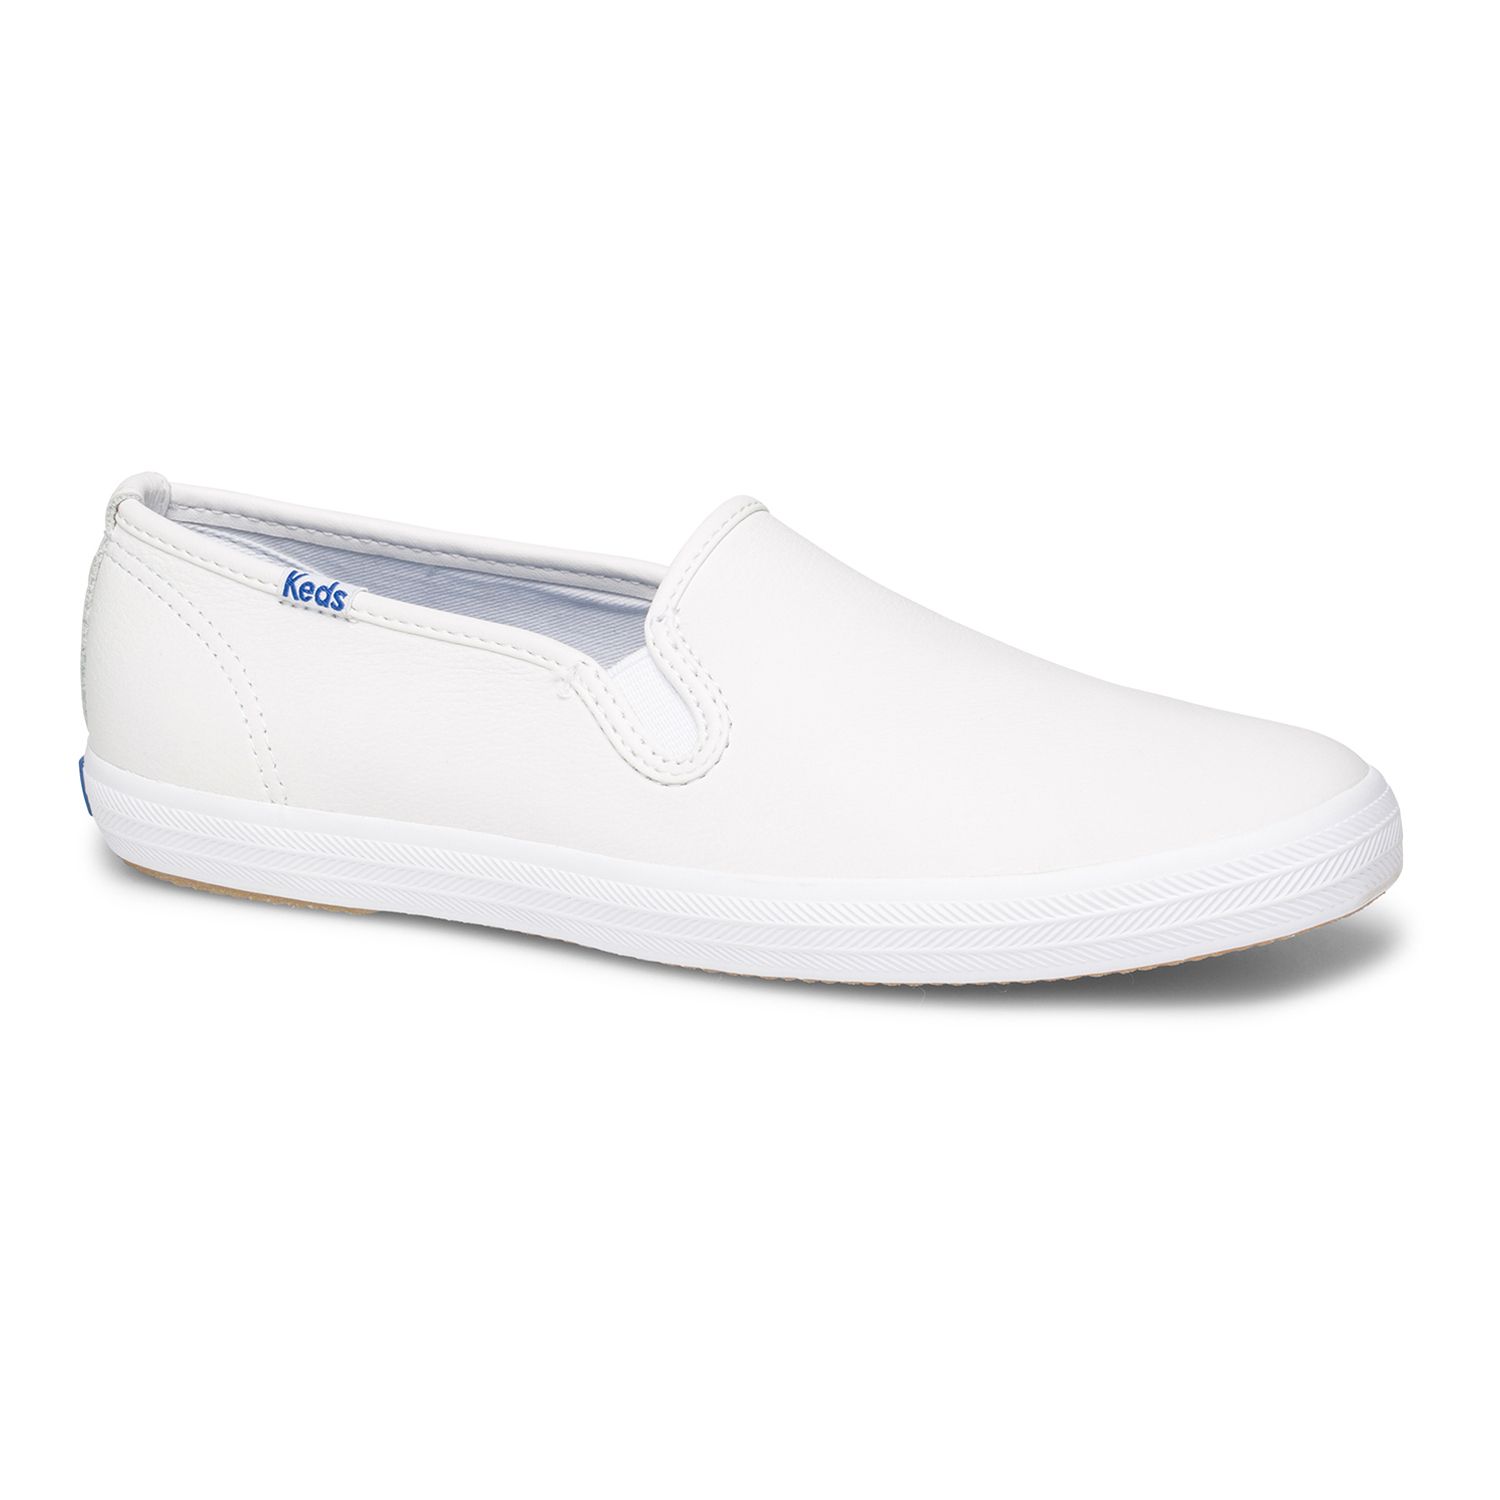 Keds Champion Women's Slip-On Leather Shoes